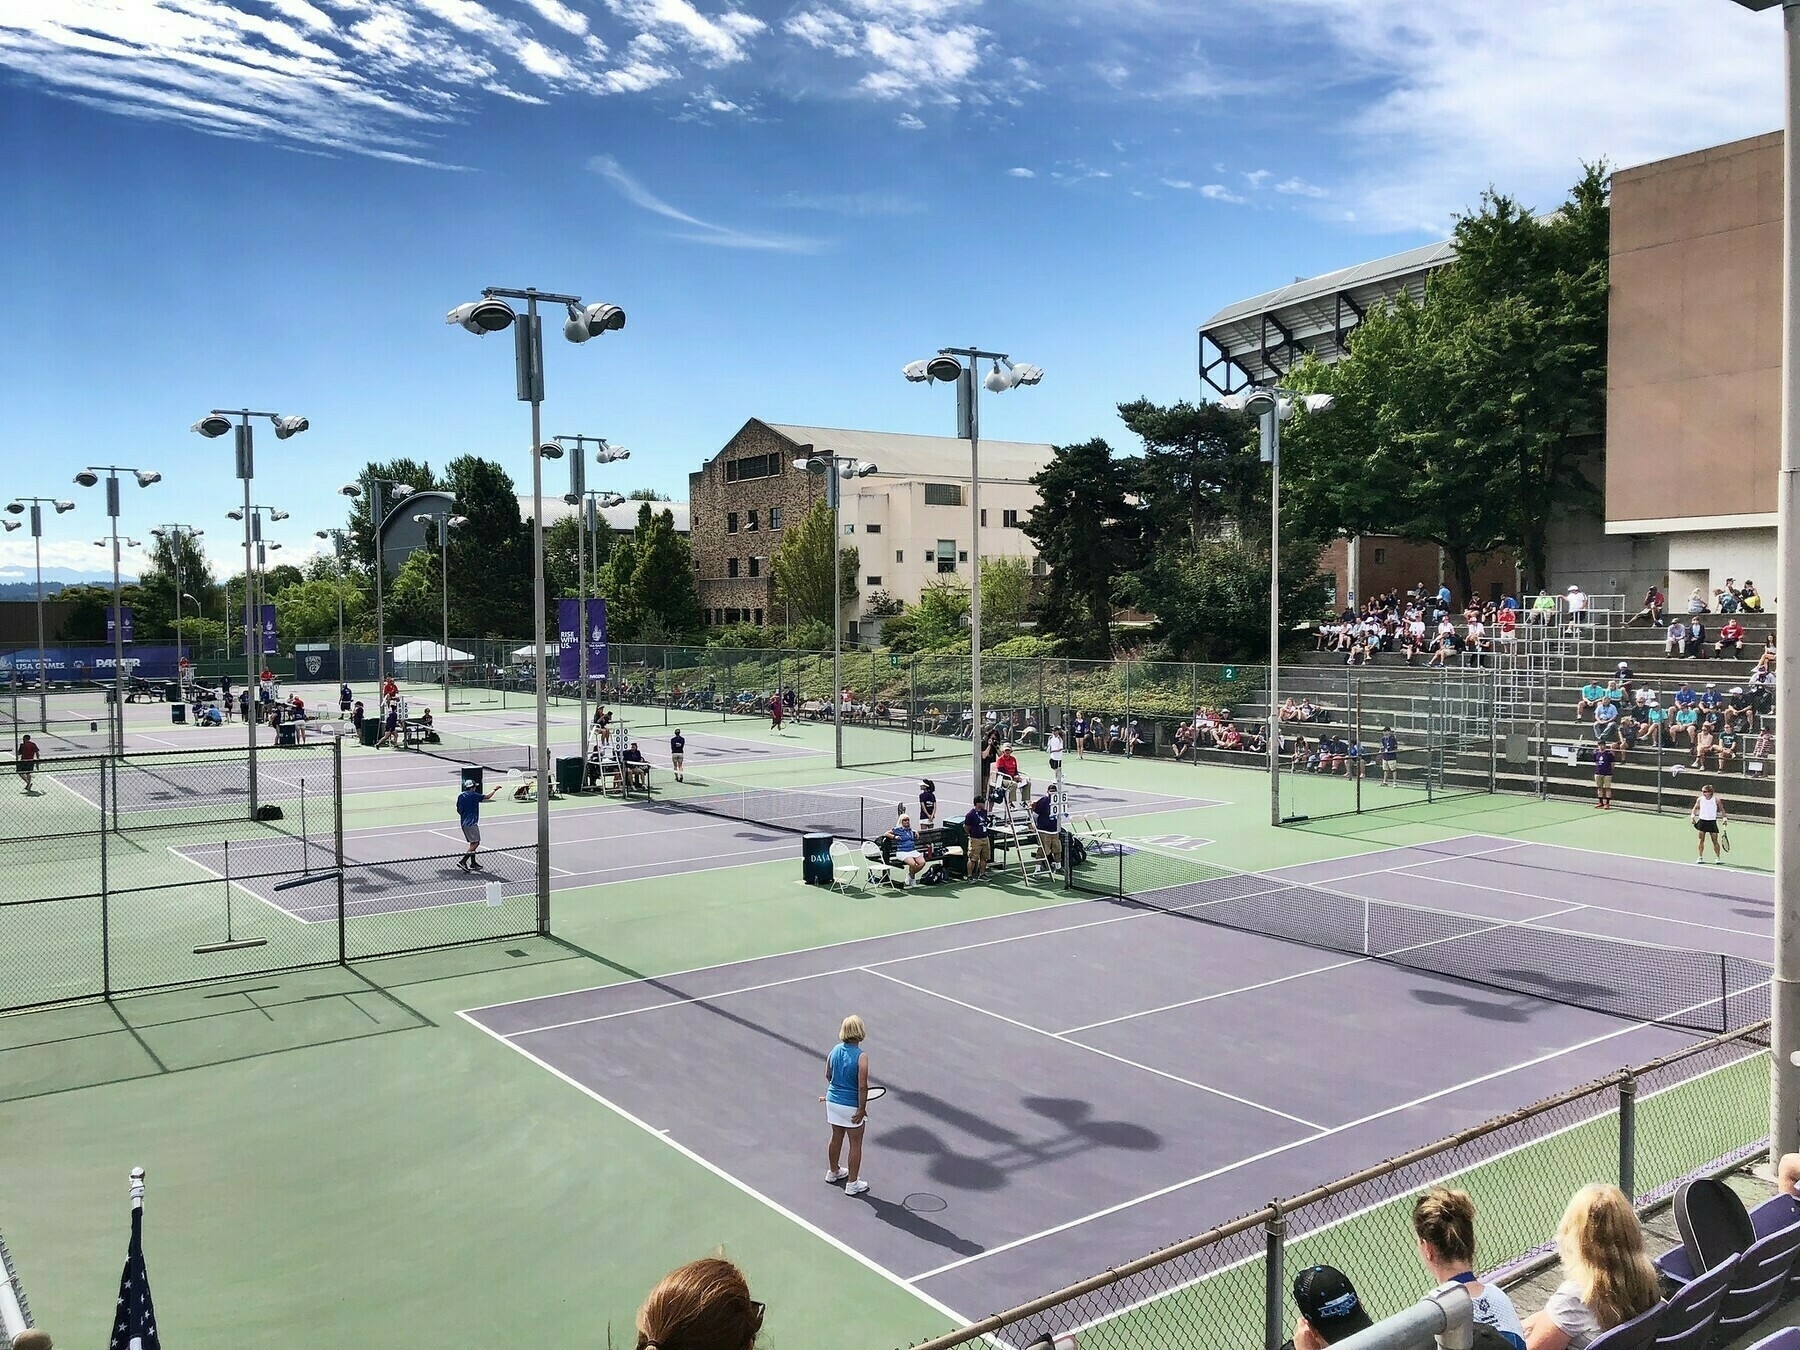 Took in some tennis on the last day of competition